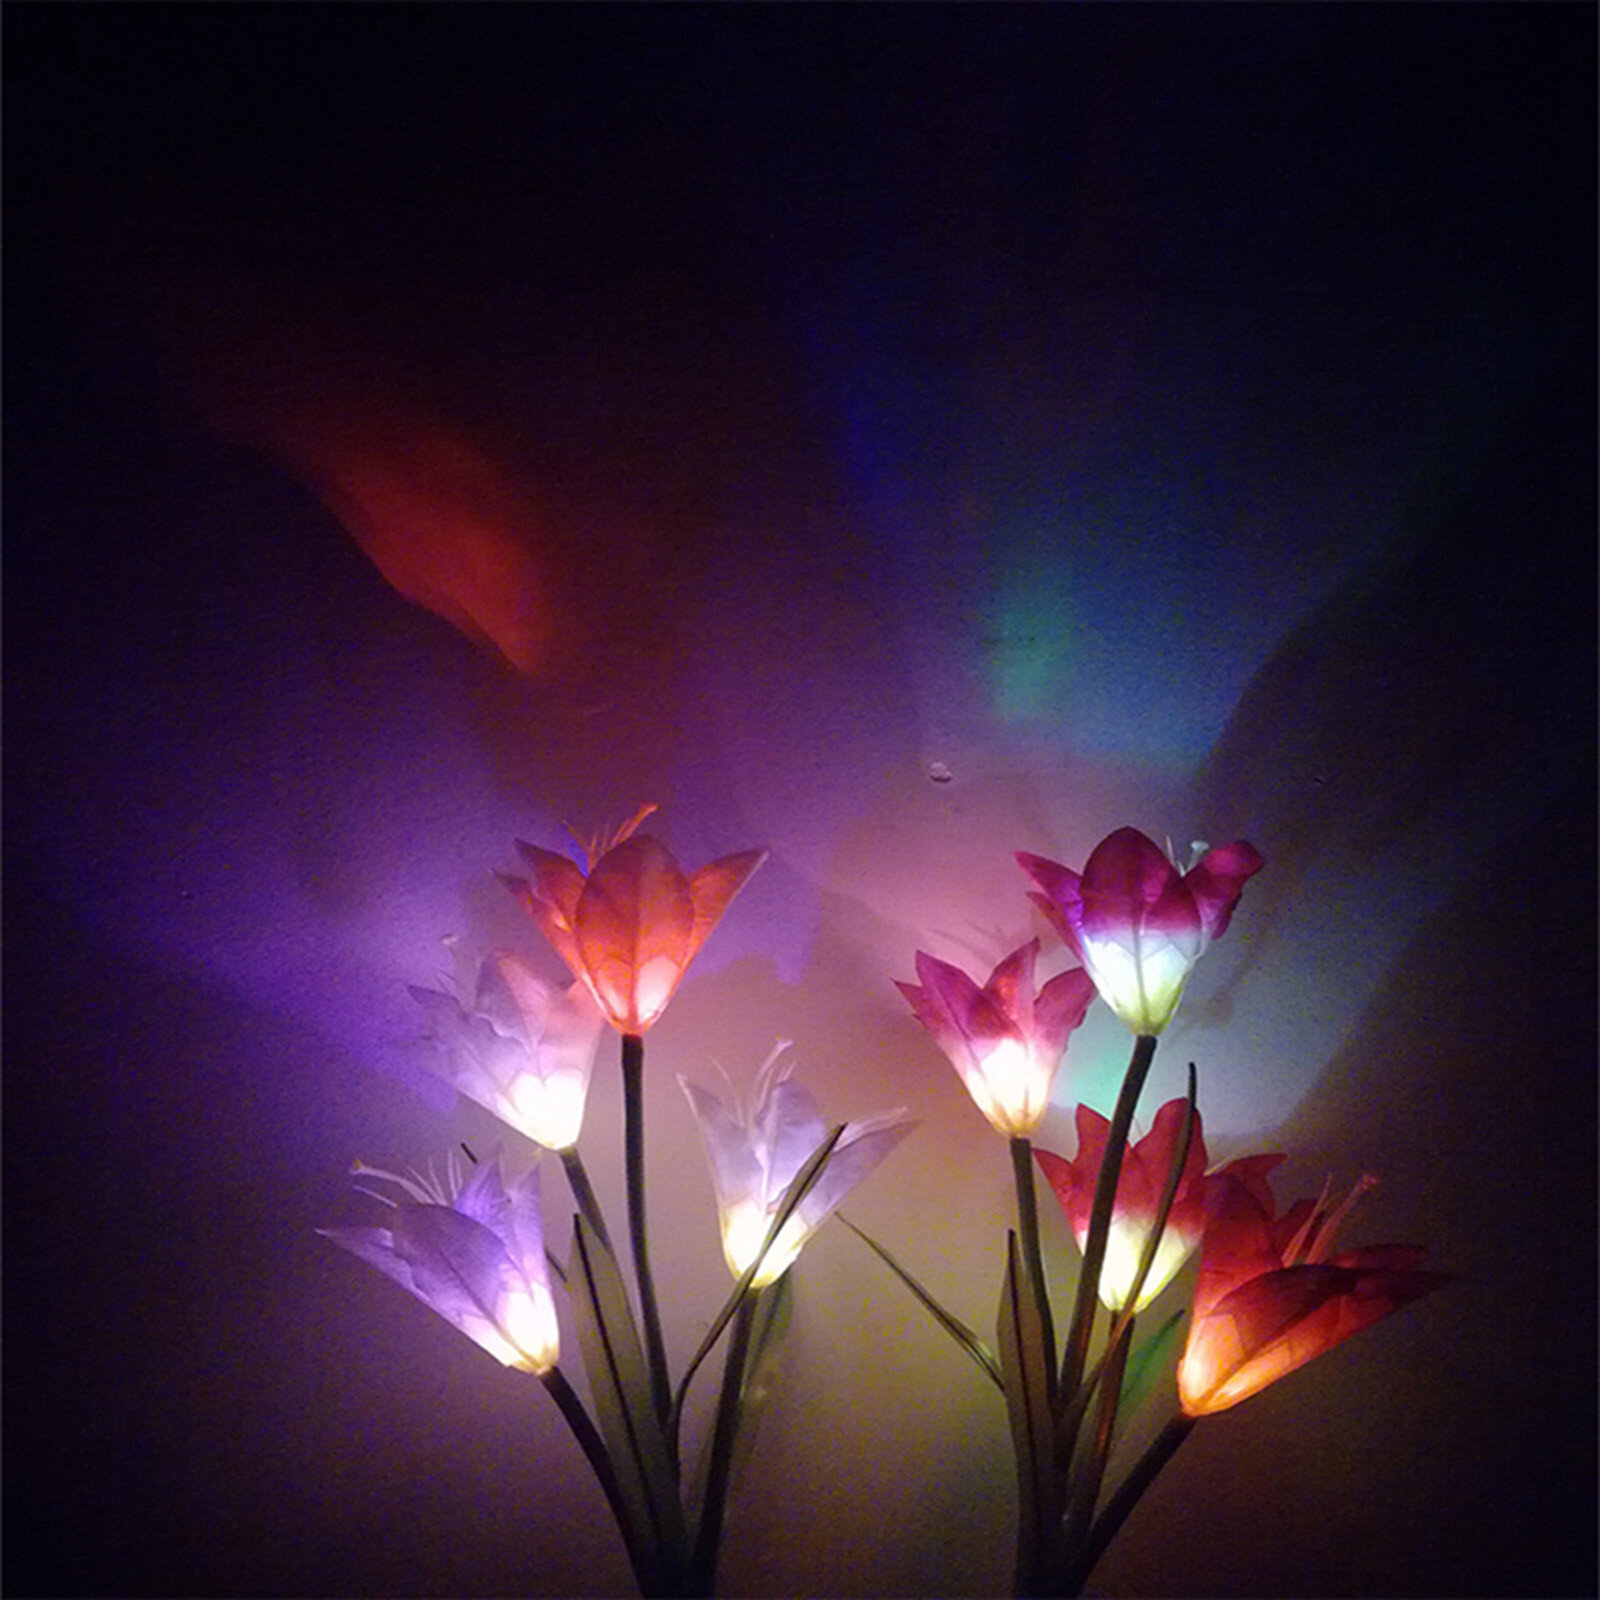 Pack of 2 Discoloration 4 Solar Lily LED Solar Flower Color Light # Red & Purple